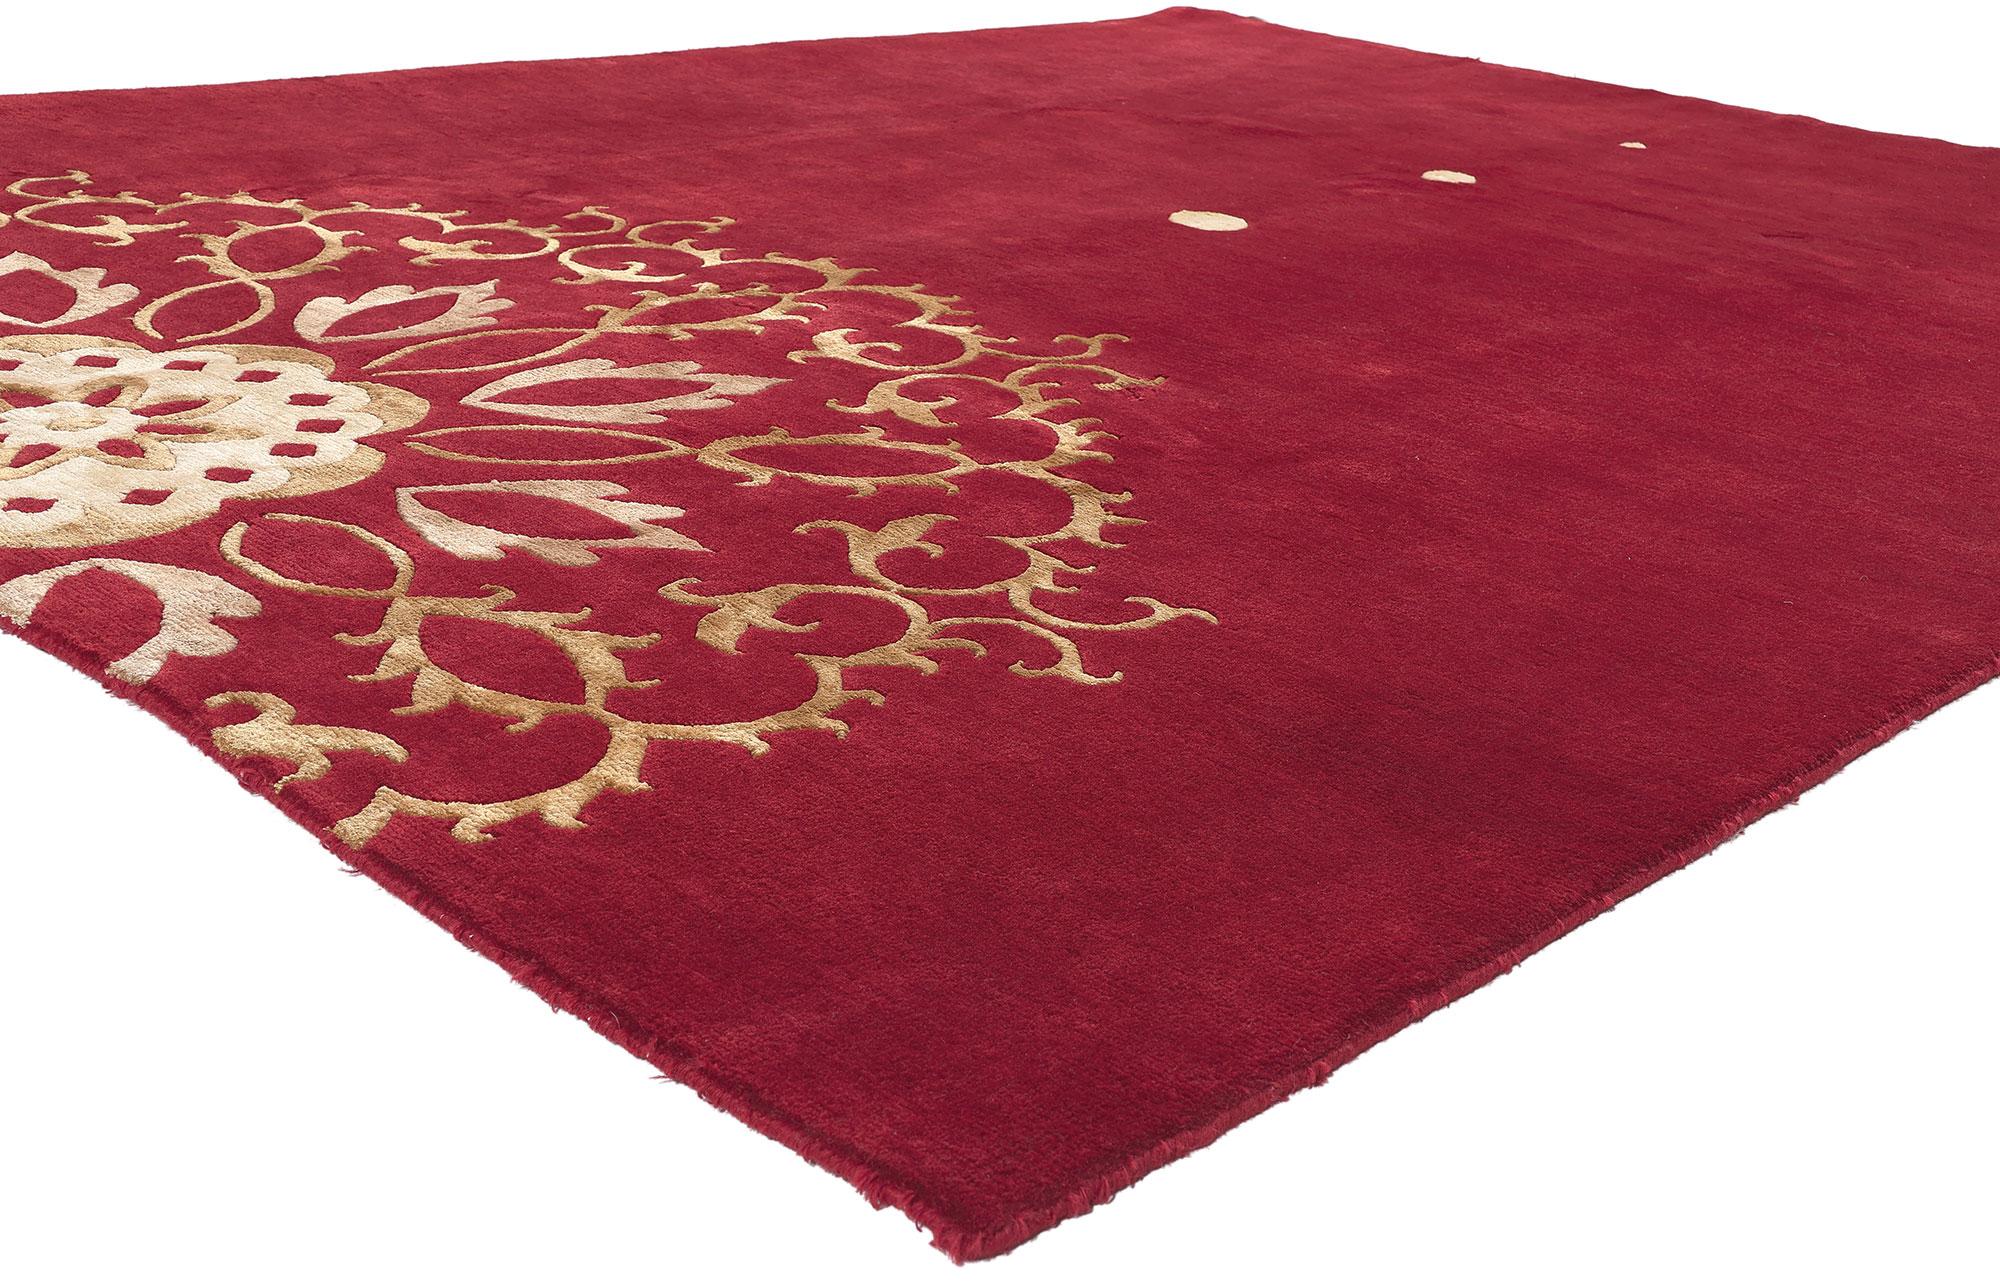 78539 Red Chinese Rug with Floral Mandala, 07'09 x 09'10.
Feng Shui meets modern Asian flair in this red Chinese Mandala rug. The opulent floral mandala and lush colors woven into this piece work together creating a rich, luxurious look. A sumptuous